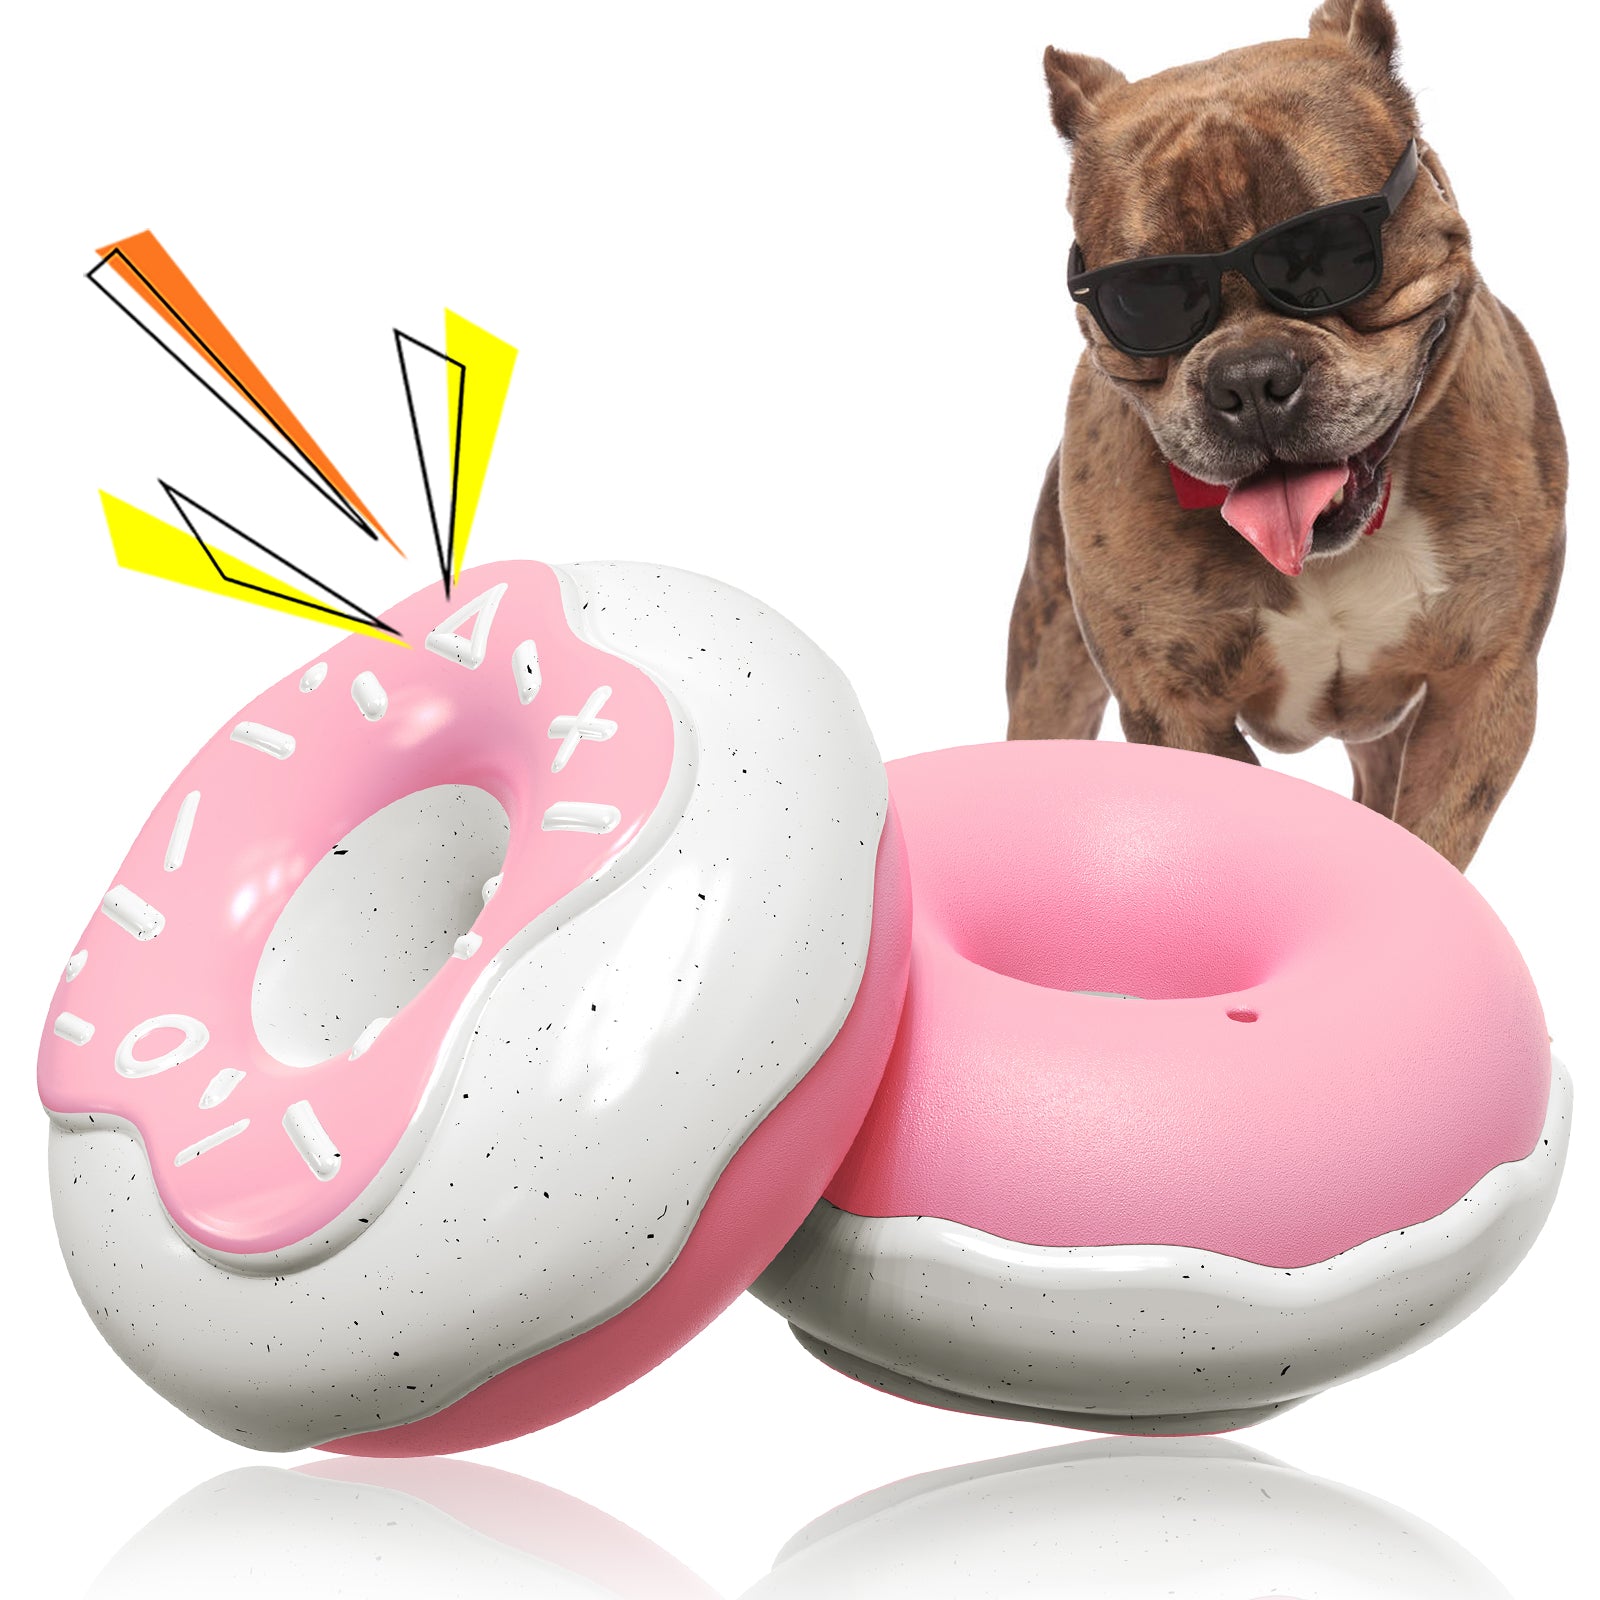 KADTC Dog Chew Toys For Aggressive Chewers Indestructible Tough Durable Squeaky Interactive Puppy Fun Teeth Toothbrush Doggie Toy Donut Squeaky Dog Toy